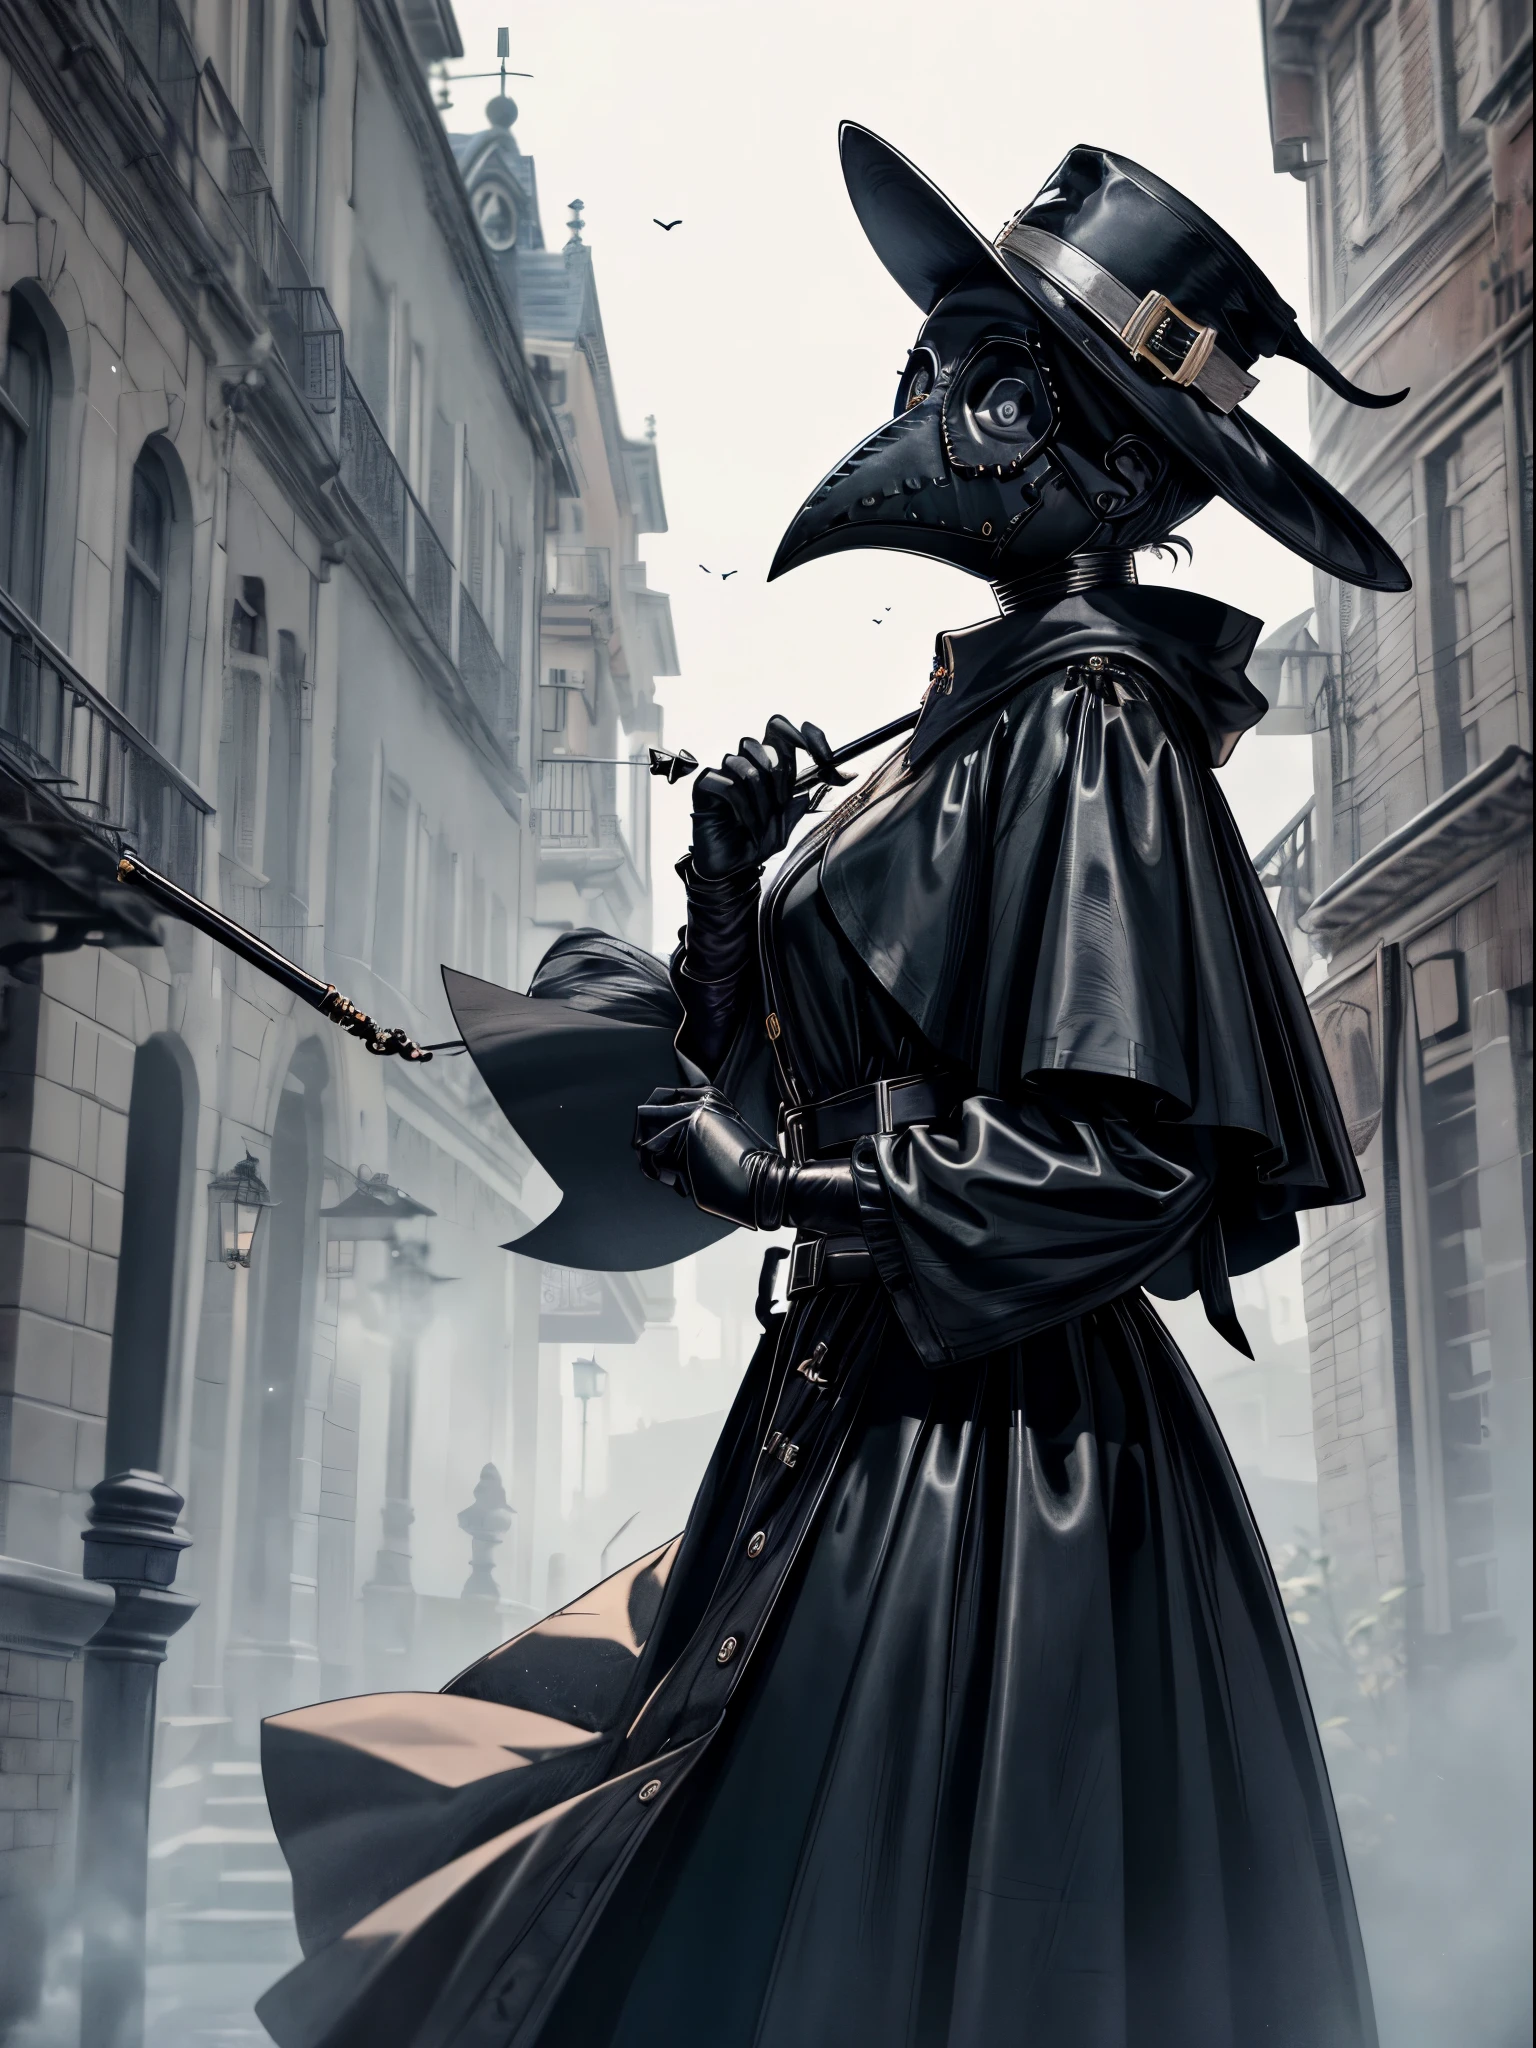 Beautiful, (masutepiece:1.2), (Best Quality:1.2), Realistic, Perfect eyes, Perfect face, Perfect Lighting, (1boy:1.2), plague doctor, Mask, Plague Doctor Mask, Faceless, With a cane, Evil atmosphere, skull belt,silk hat, chain, Black veil, trench coat, beaked mask, volume illumination:1.1, darkness, (detail: 1.2), cana, Floating particles, (depth of fields), High quality, Fujifilm 85mm, Ruins, landscape, highly detailed back ground, Nightmare, 8K, Convoluted, Grip, Mysterious,Black fog, Leather handbags,dark